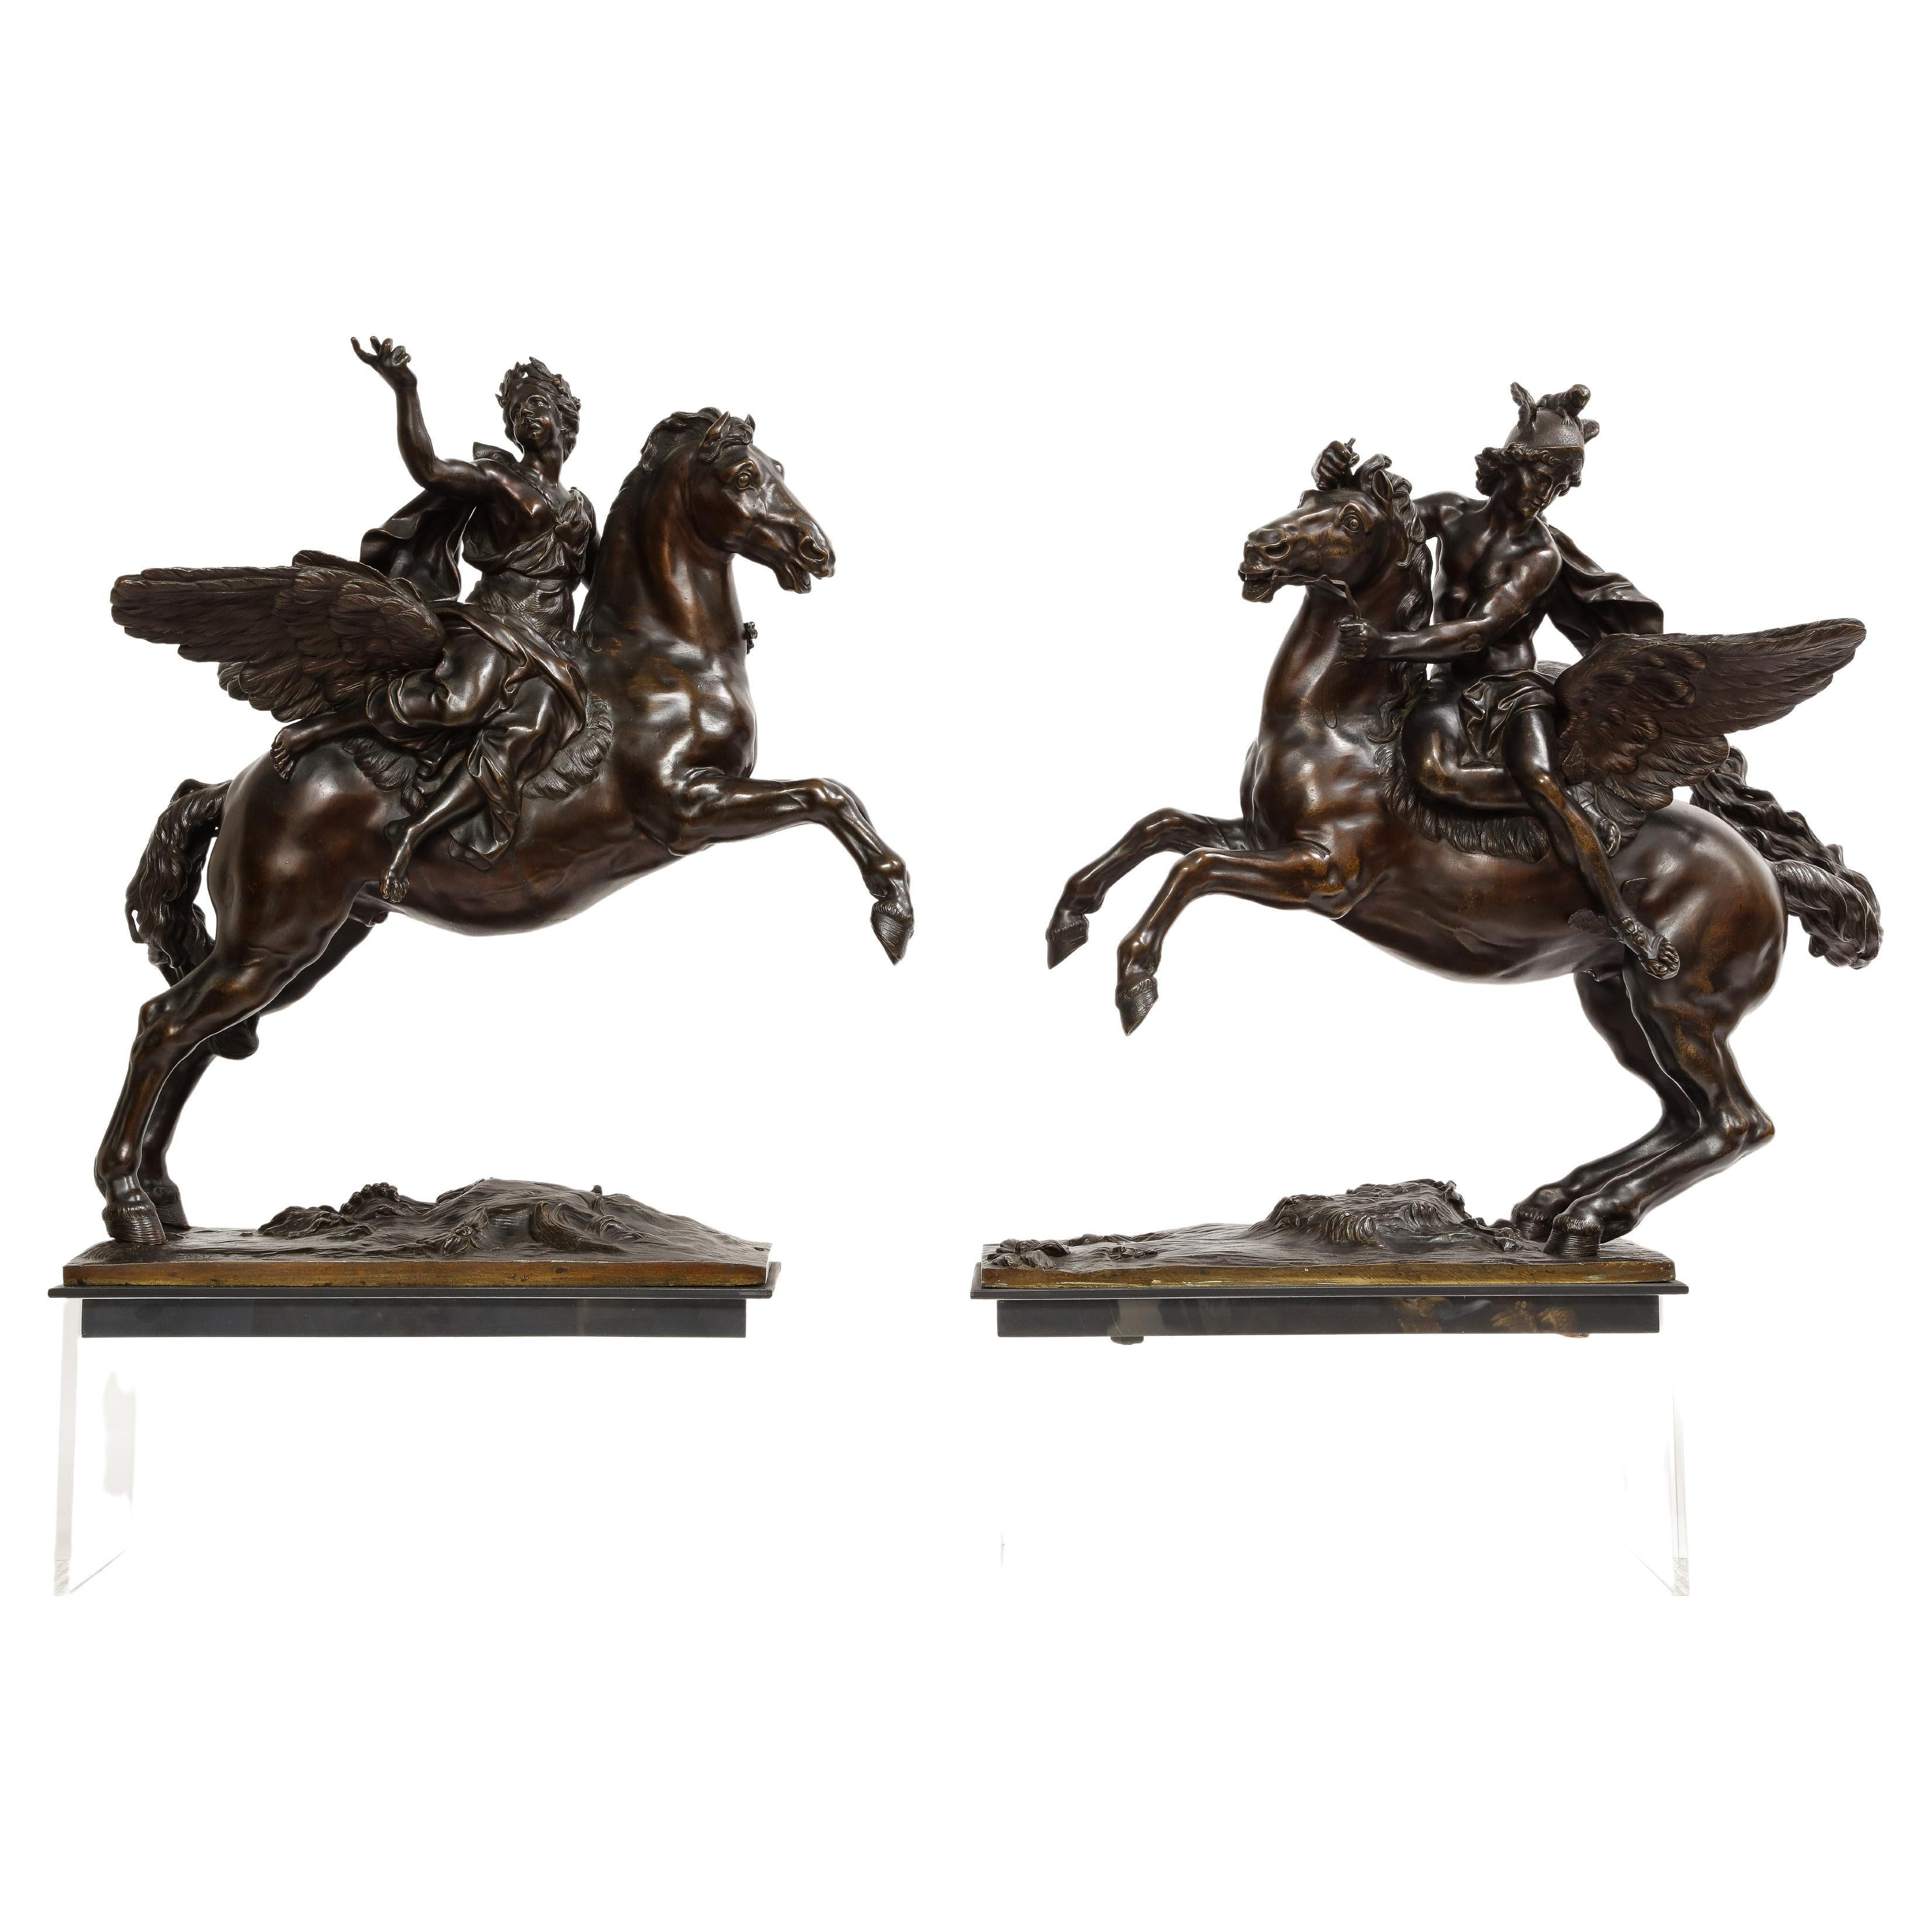 Pr. French 19th C. Bronze Groups Fame & Mercury After Models by Antoine Coysevox